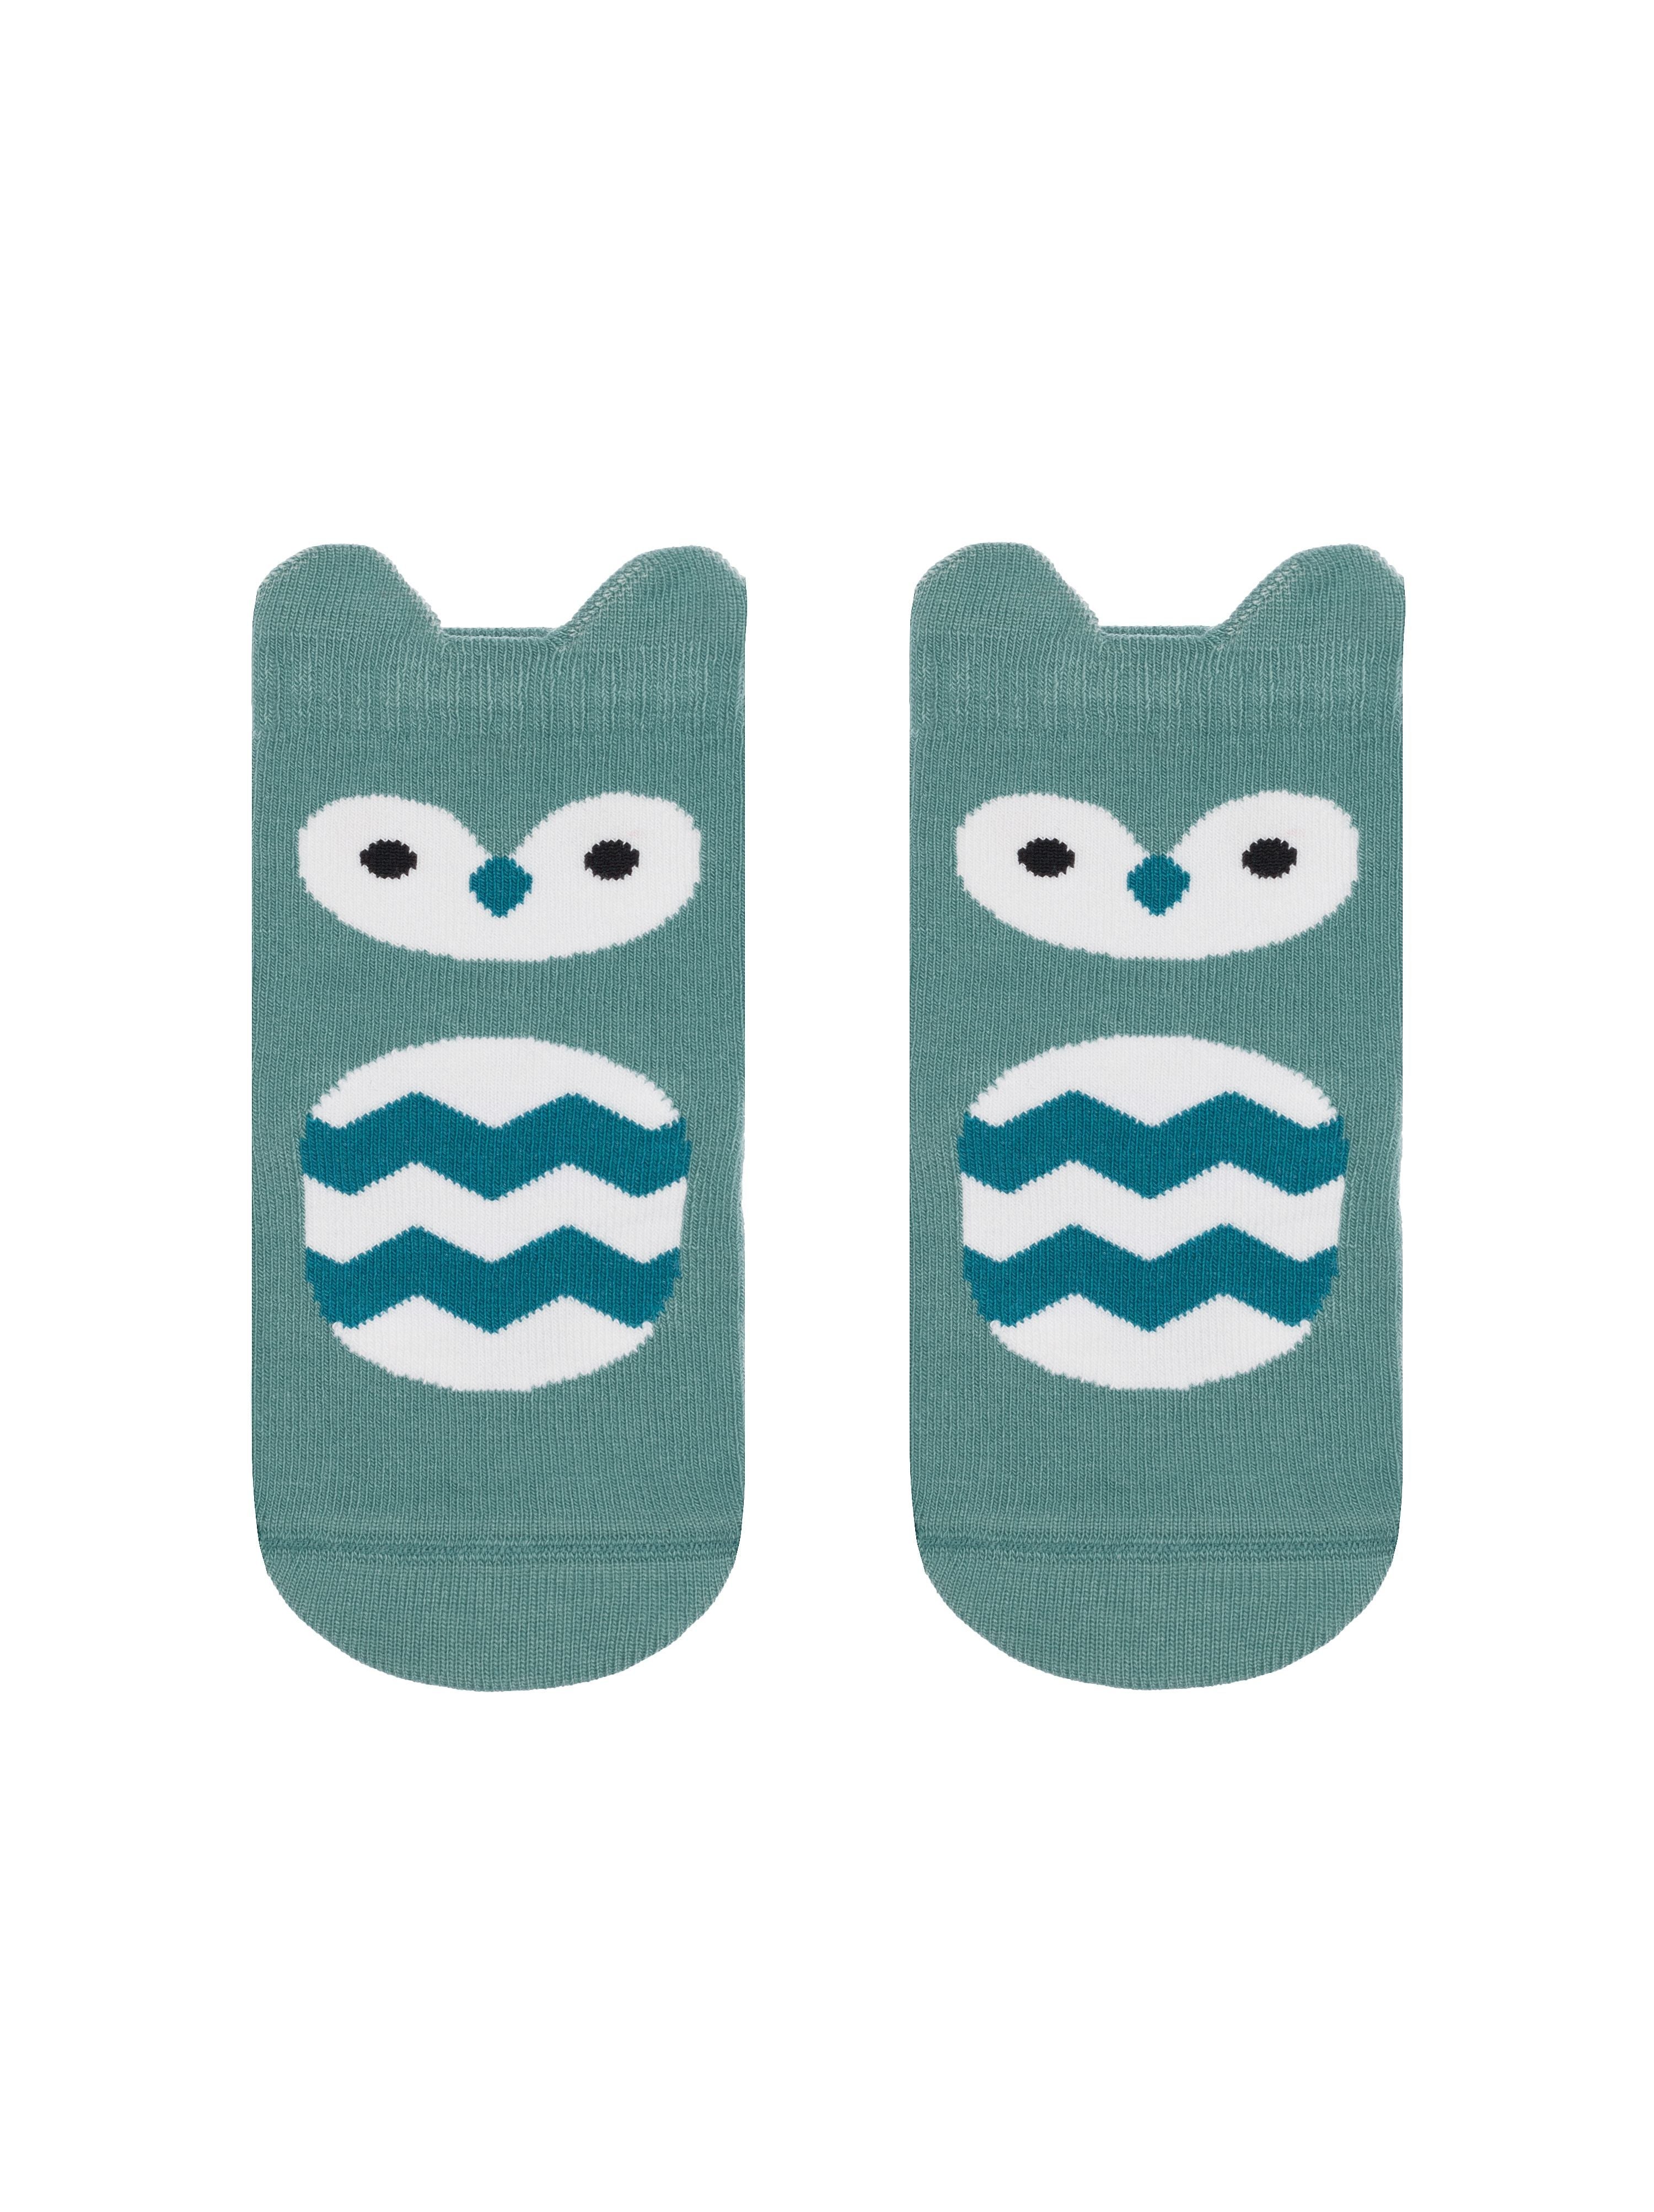 Owl baby socks light blue color by Conte-Kids